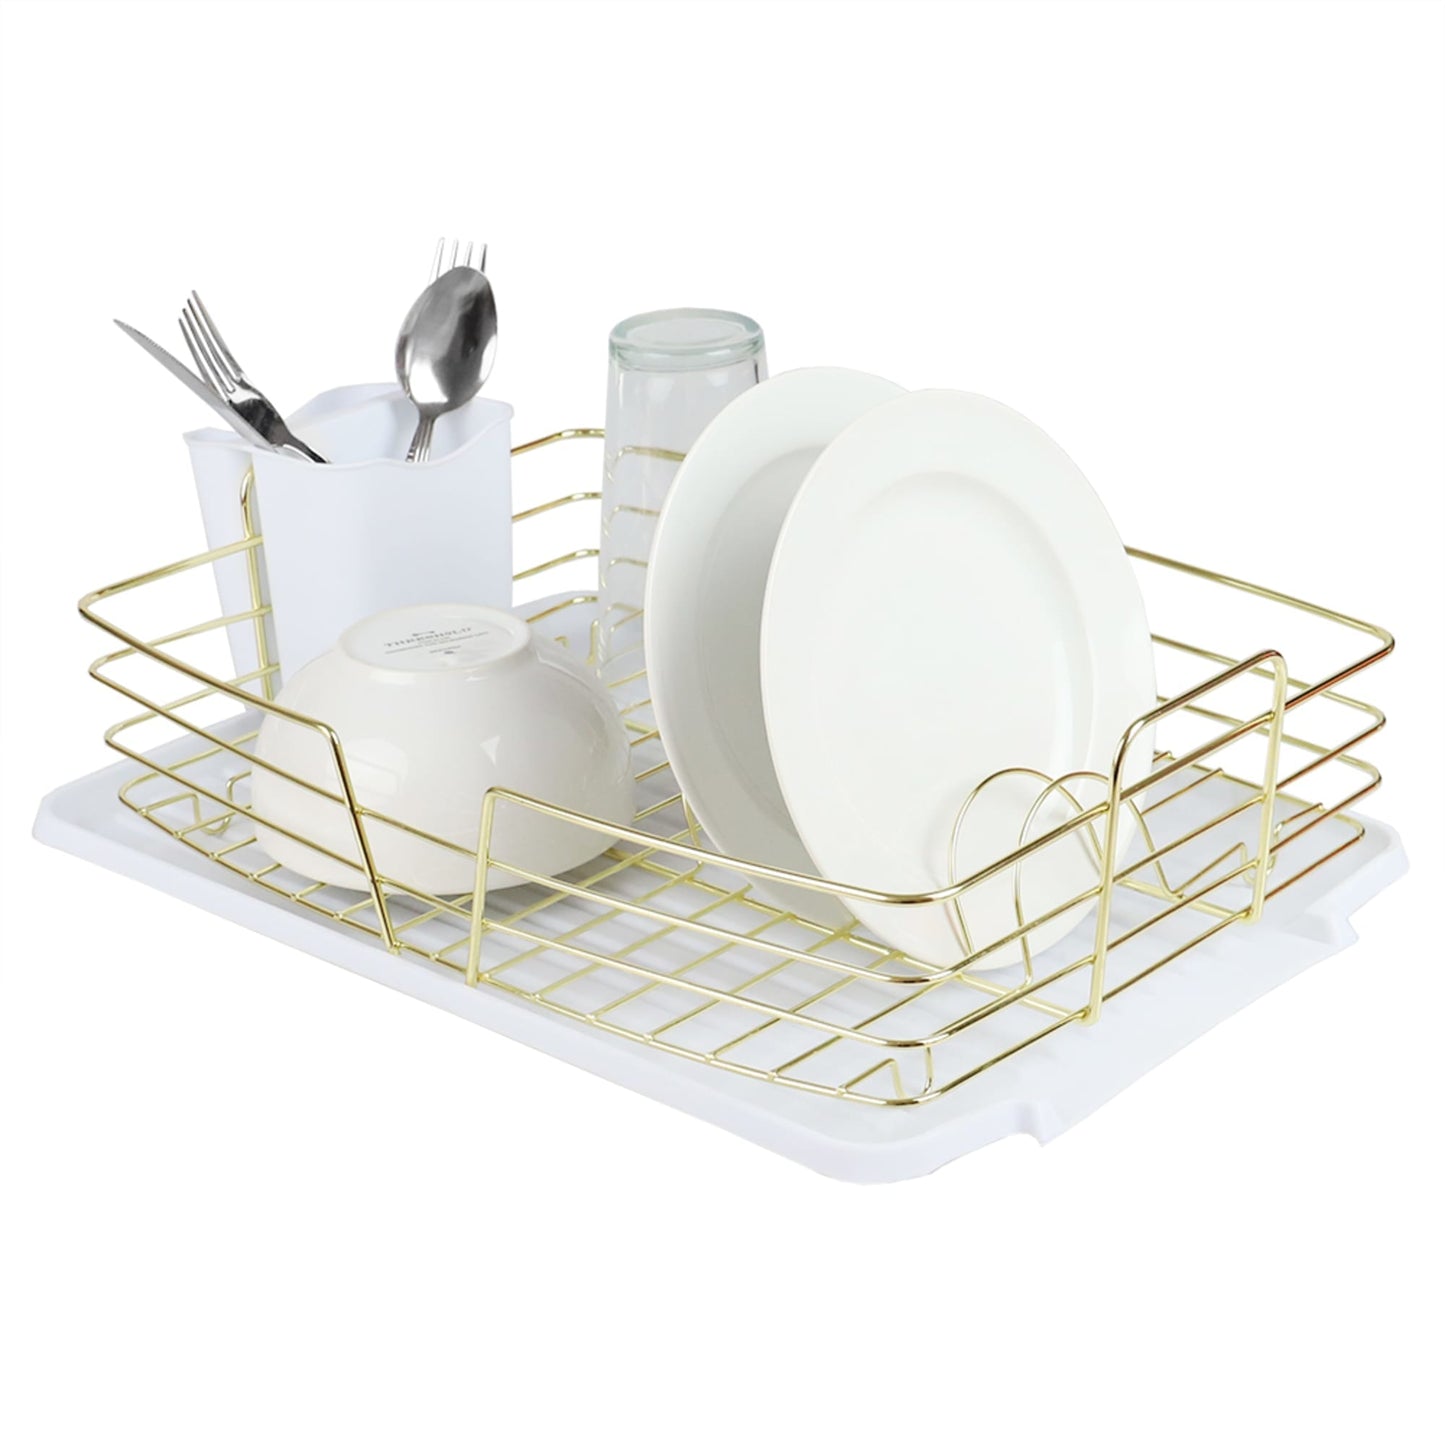 Michael Graves Design Deluxe Dish Rack with Gold Finish and Removable Utensil Holder, White/Gold